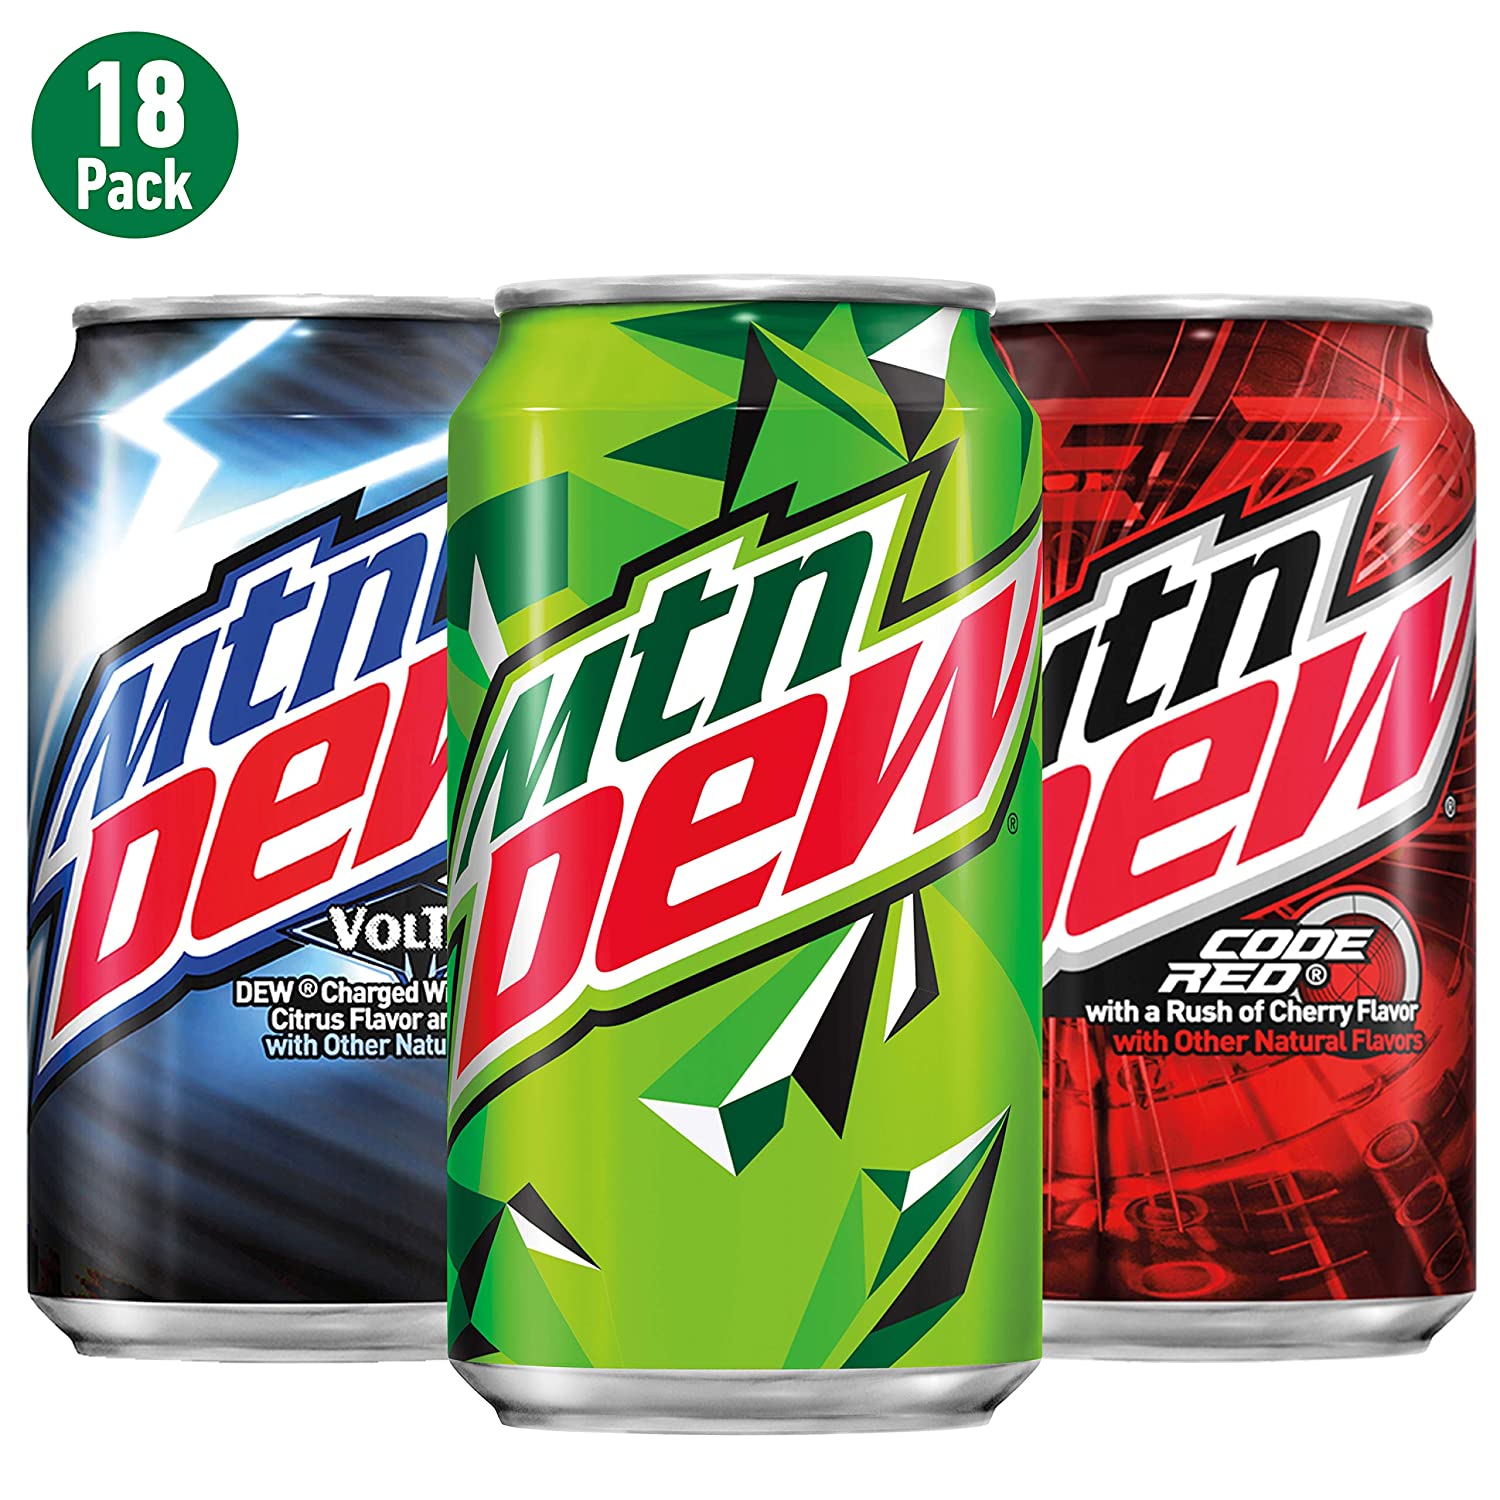 Soda Variety Pack with Mountain Dew, Dew Code Red, and Dew Voltage